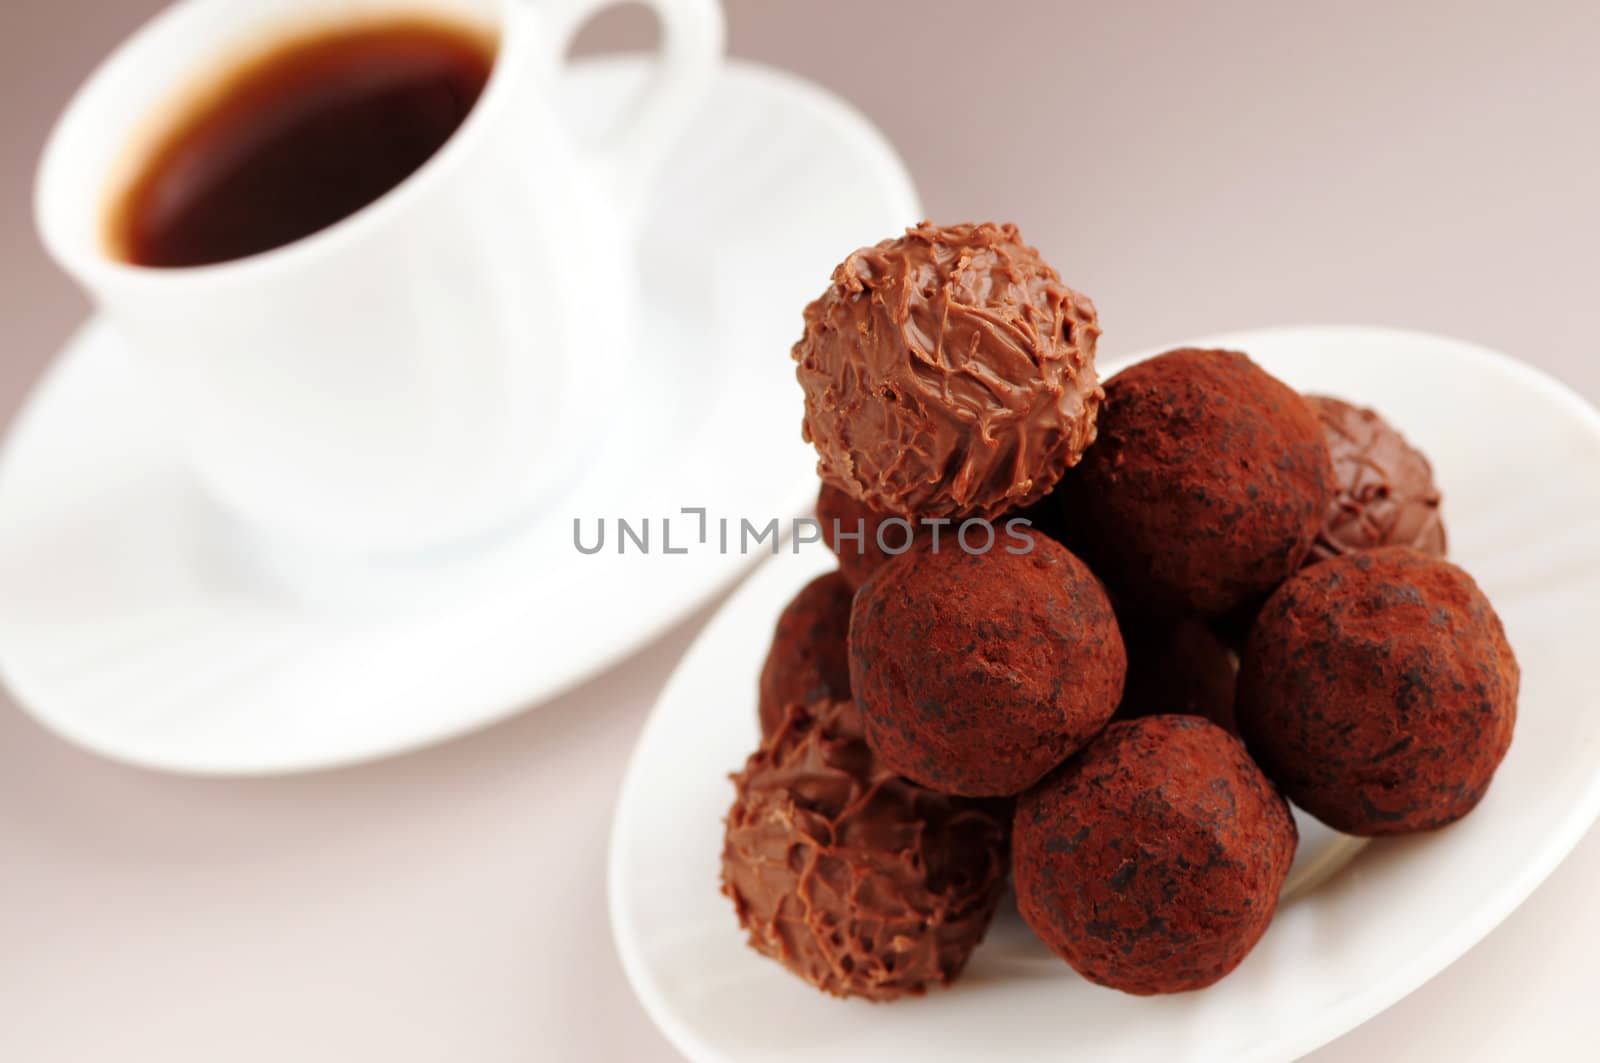 Chocolate truffles and coffee by elenathewise